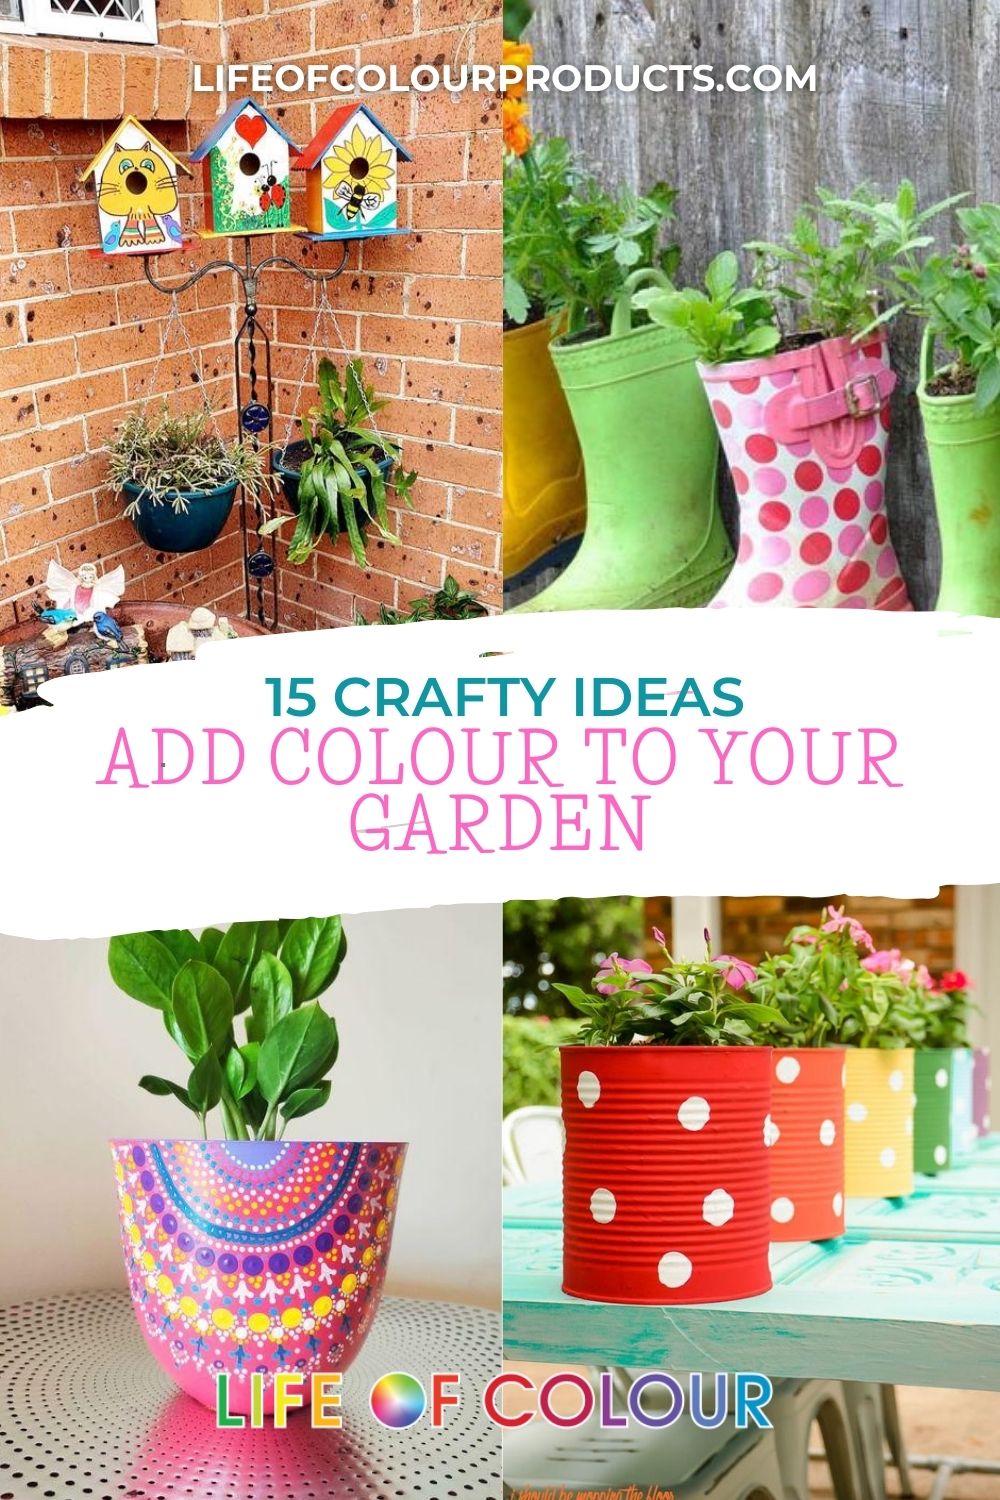 15 Crafty ideas to add colour to your garden this summer